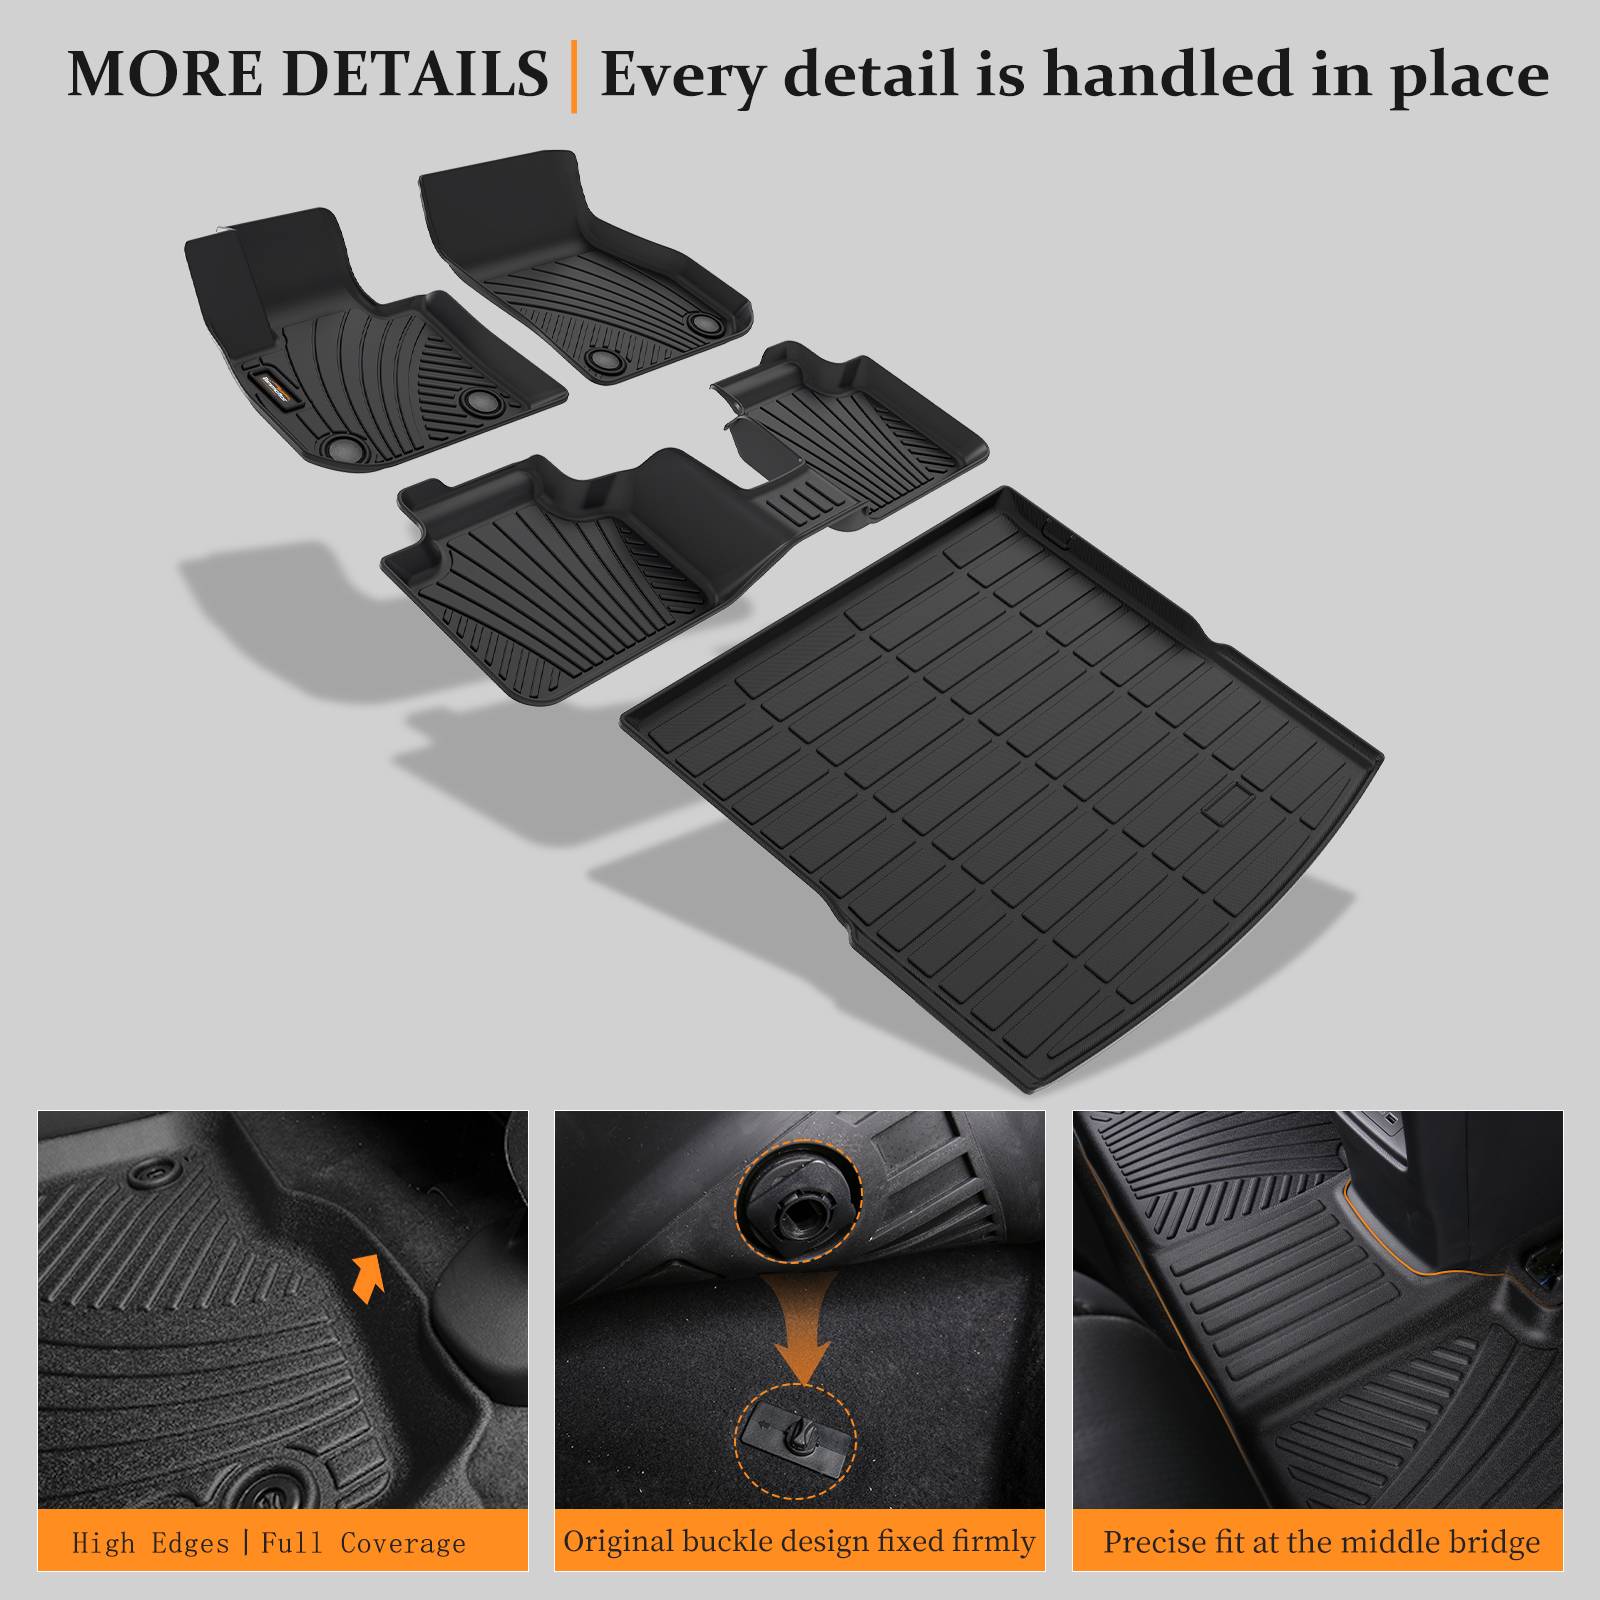 Binmotor-Floor Mats for Toyota RAV4 Hybrid Models - Custom Car Mats - Maximum Coverage, All Weather, Laser Measured - This Full Set Includes 1st and 2nd Rows Black（compatible year 2019-2024）